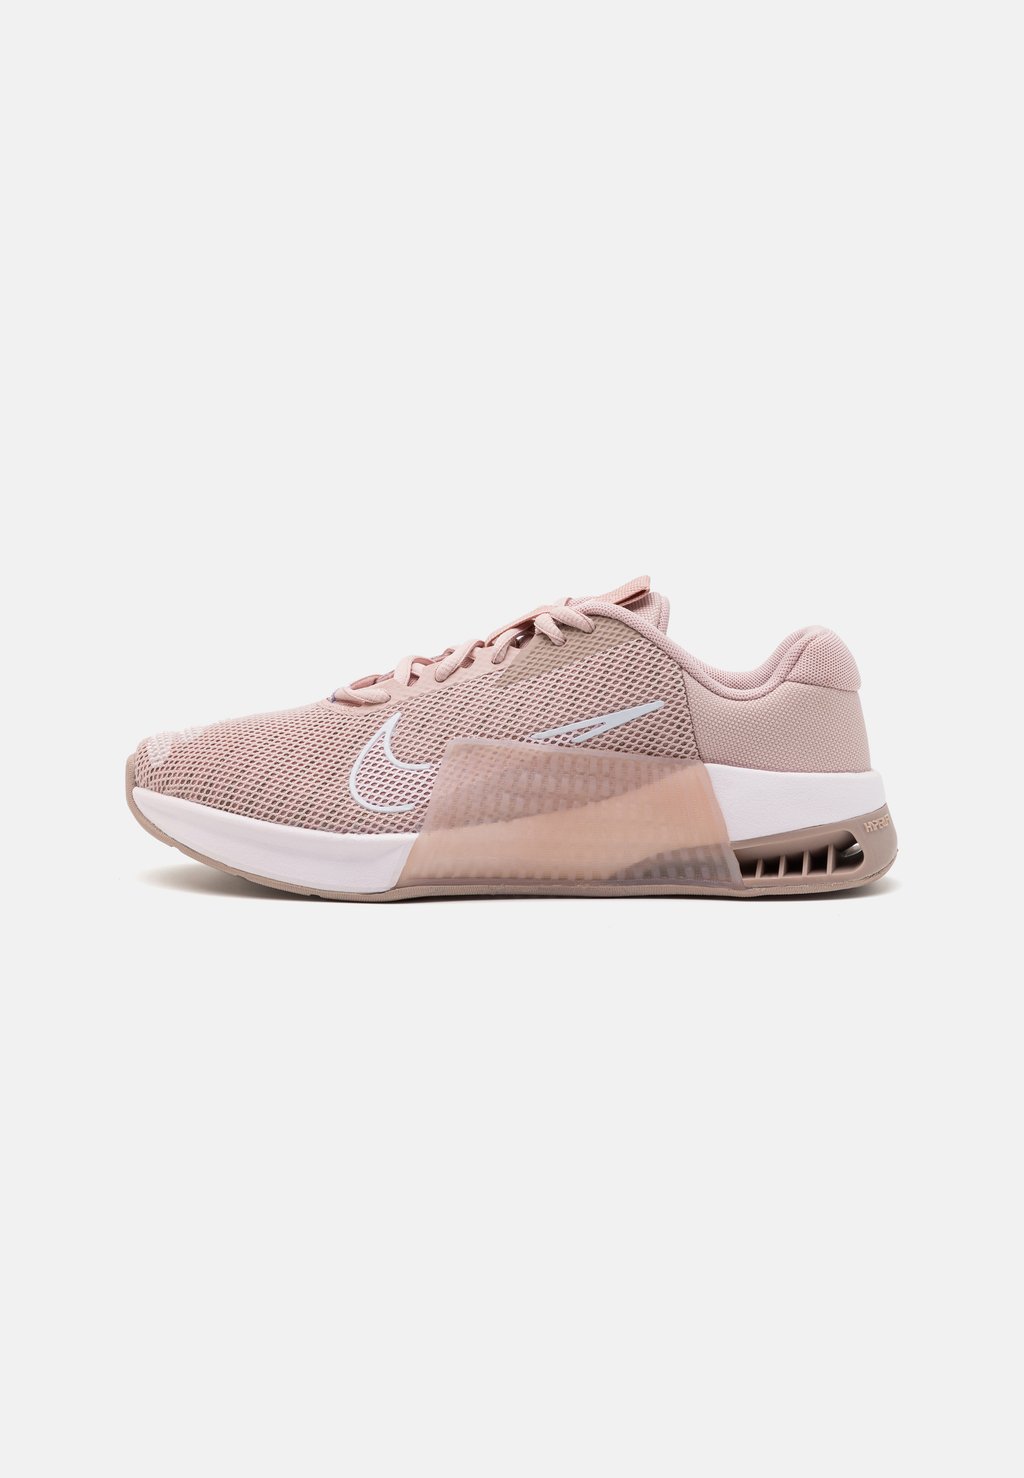 Кроссовки METCON 9 Nike, цвет pink oxford/white/diffused taupe/pearl pink 2019 hot sale wholesale button pearl freshwater pearl aaa 8 8 5mm white pink purple button pearl